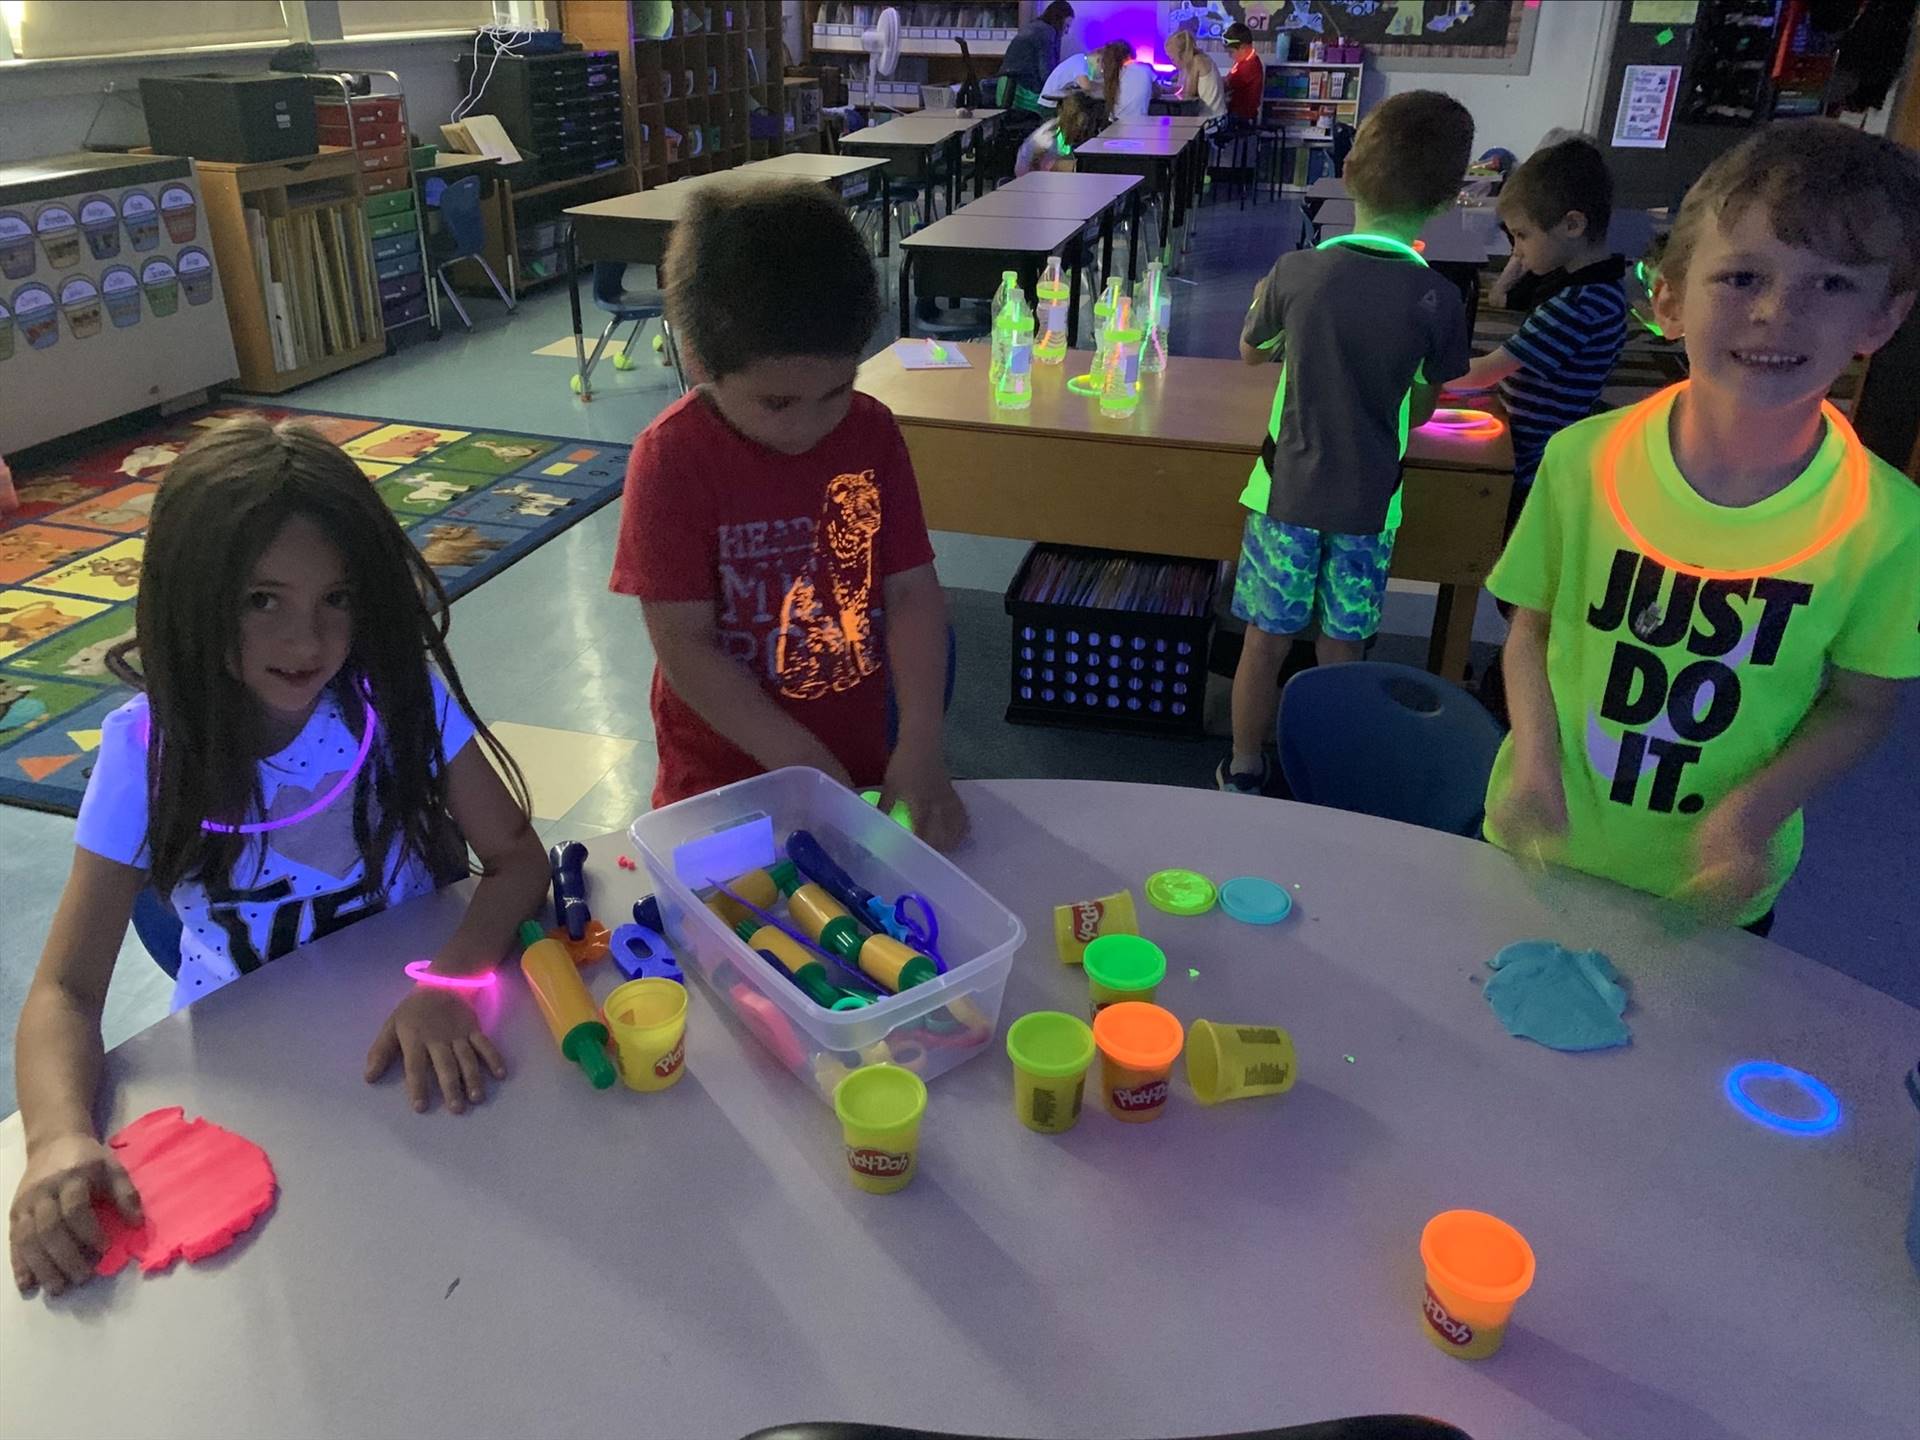 3 students playing with glowing play do